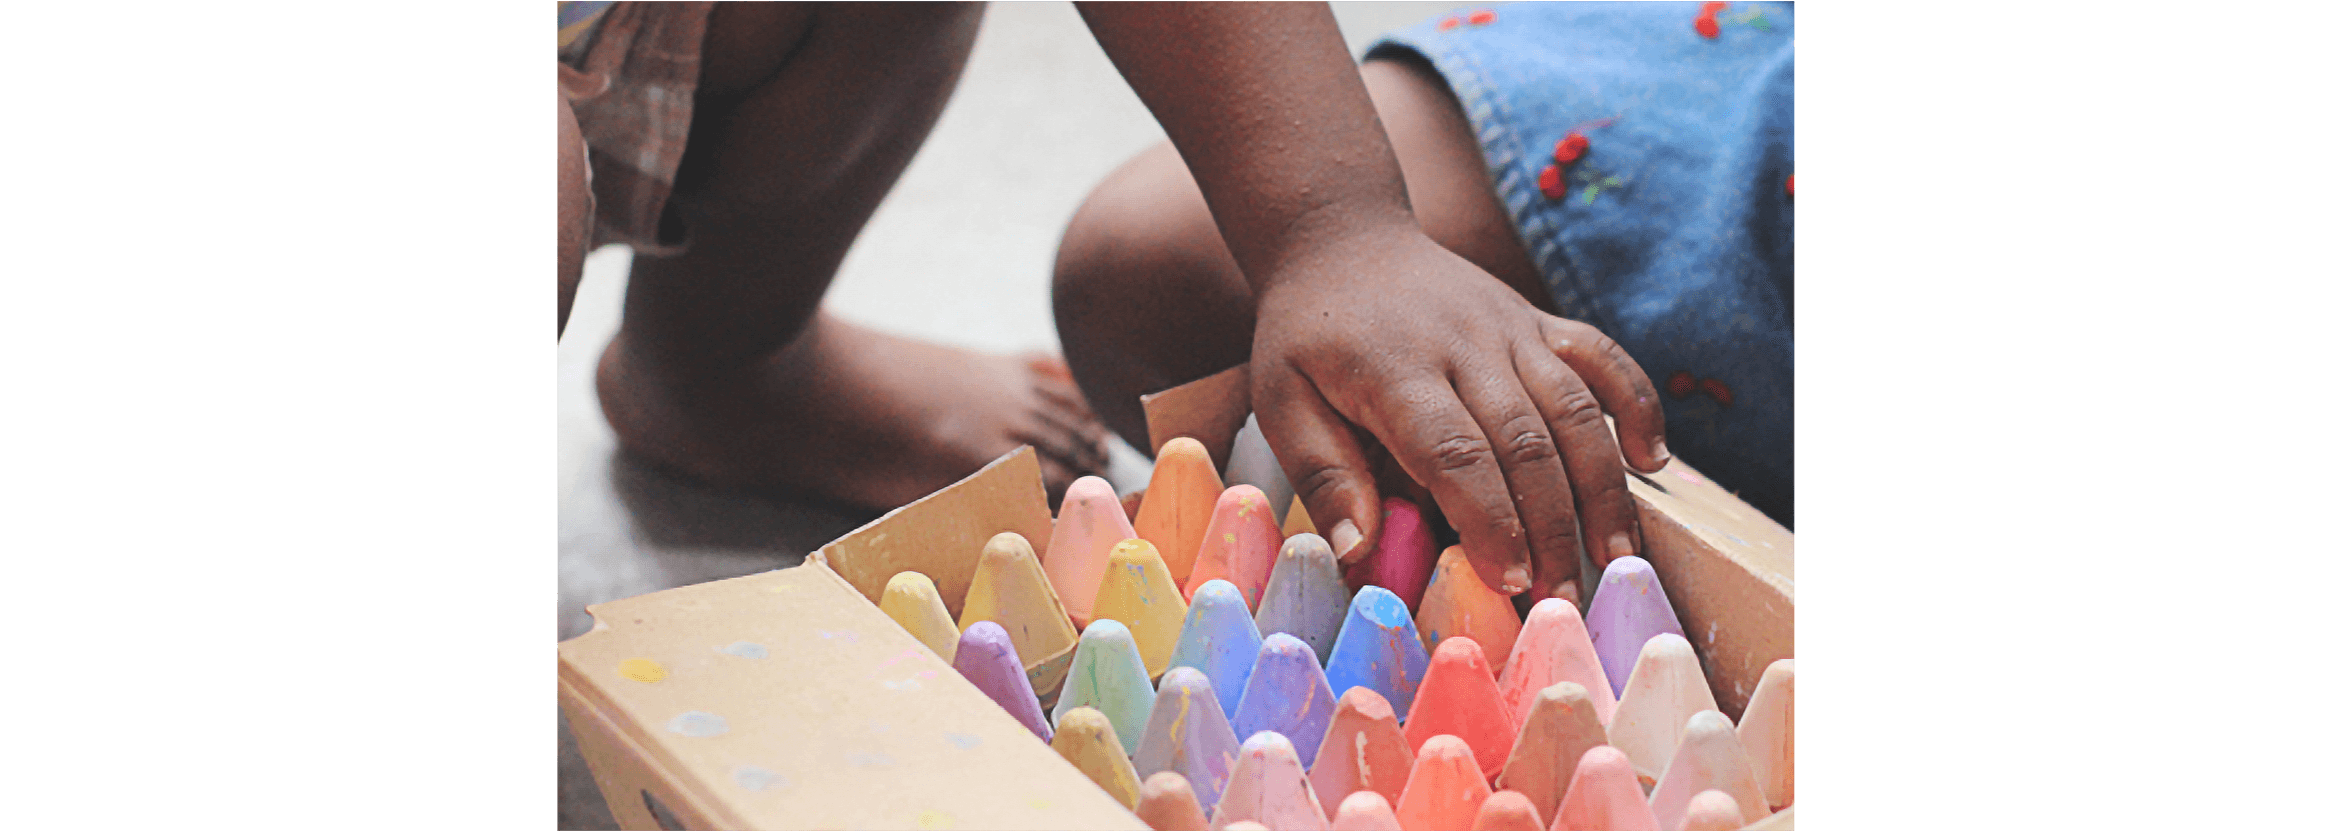 A child opens a large carton of different coloured chalk that’s been donated to their school.